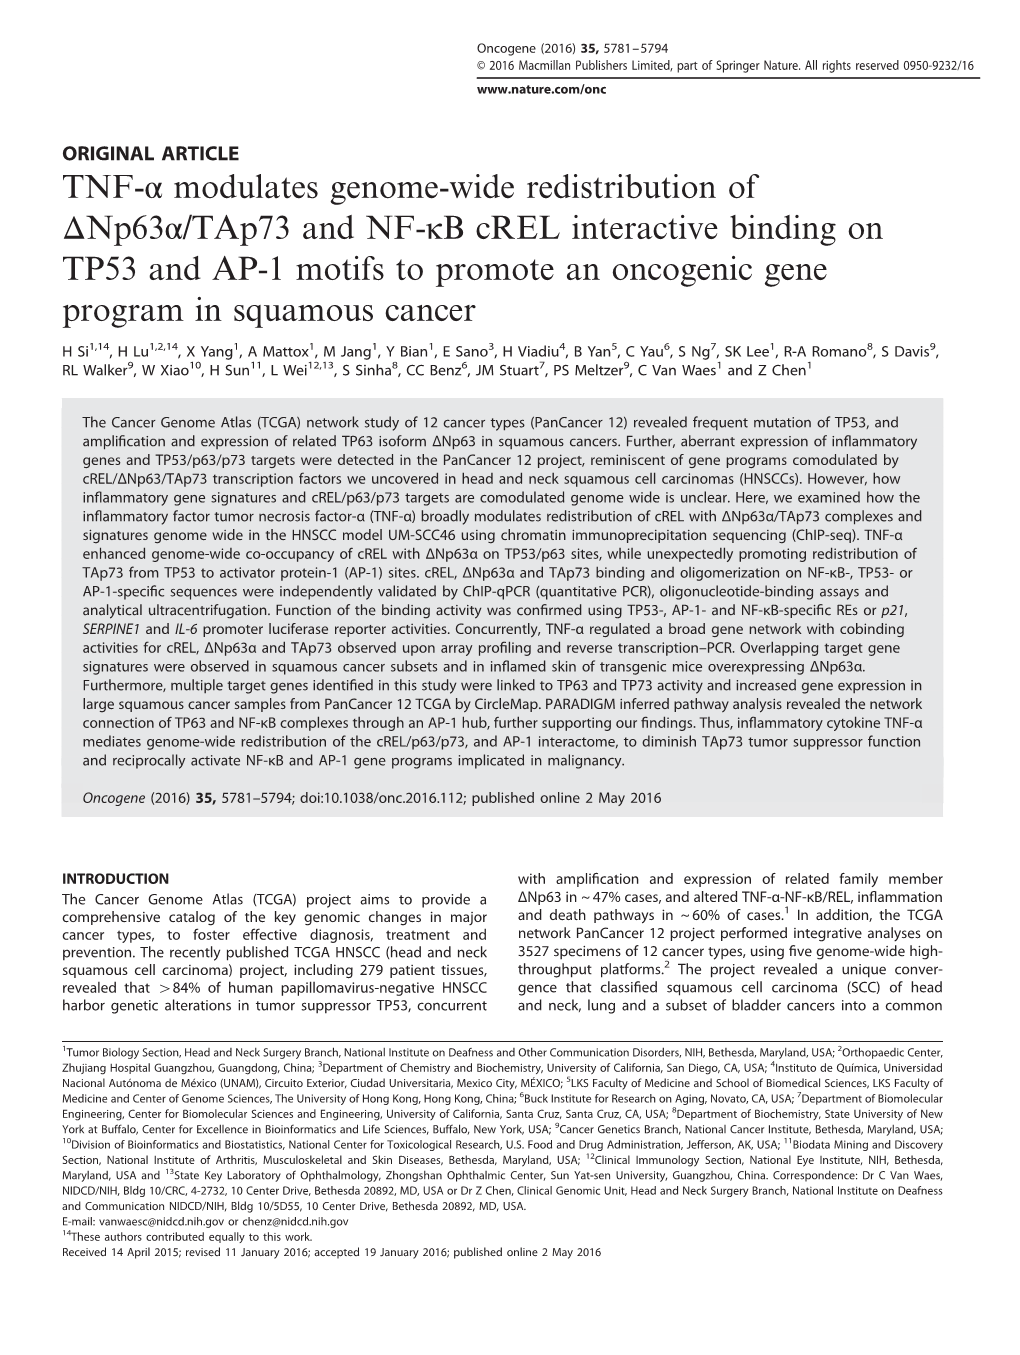 TNF-Α Modulates Genome-Wide Redistribution of Δnp63α/Tap73 And